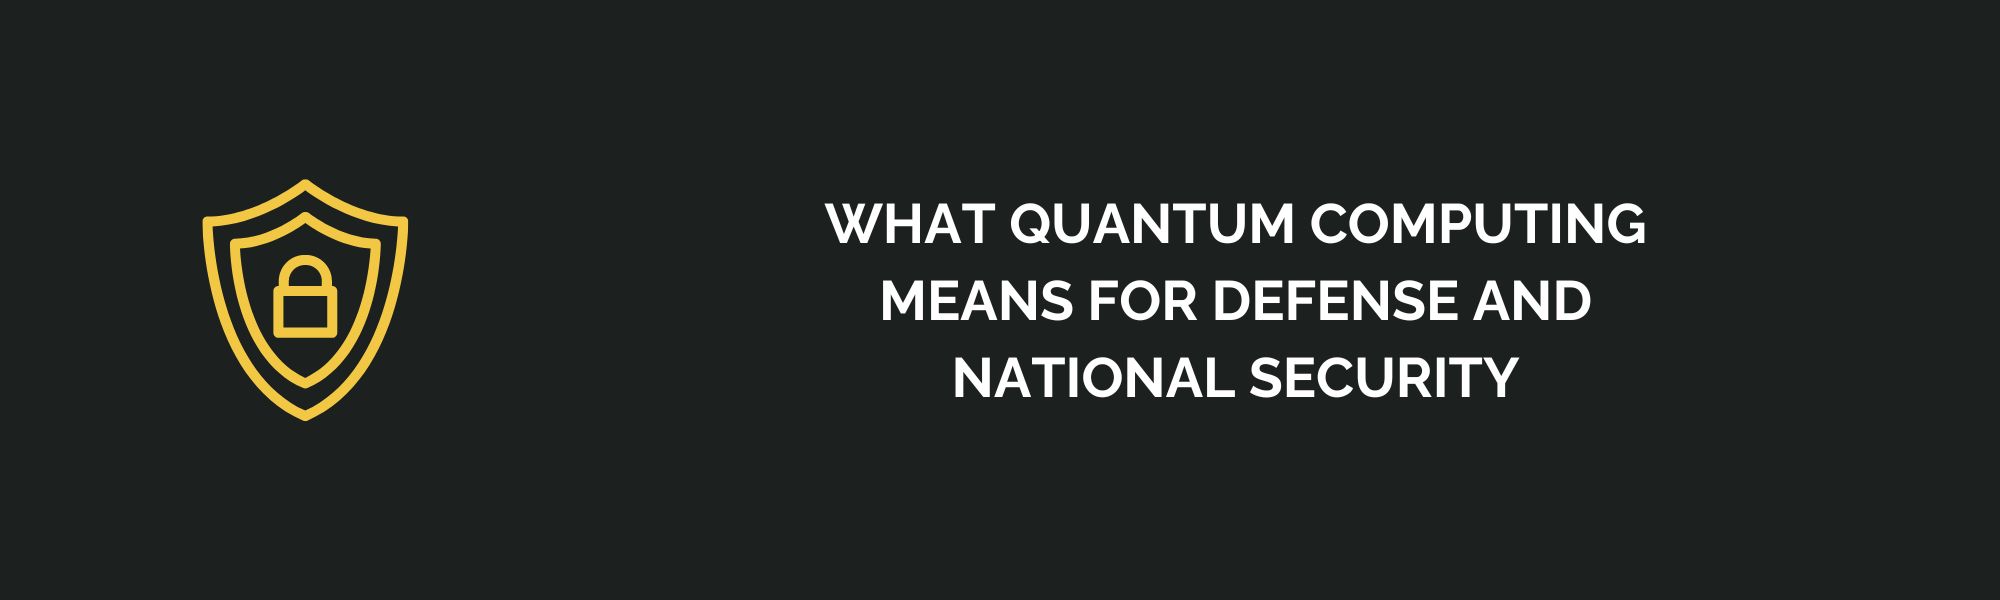 What Quantum Computing Means for Defense and National Security